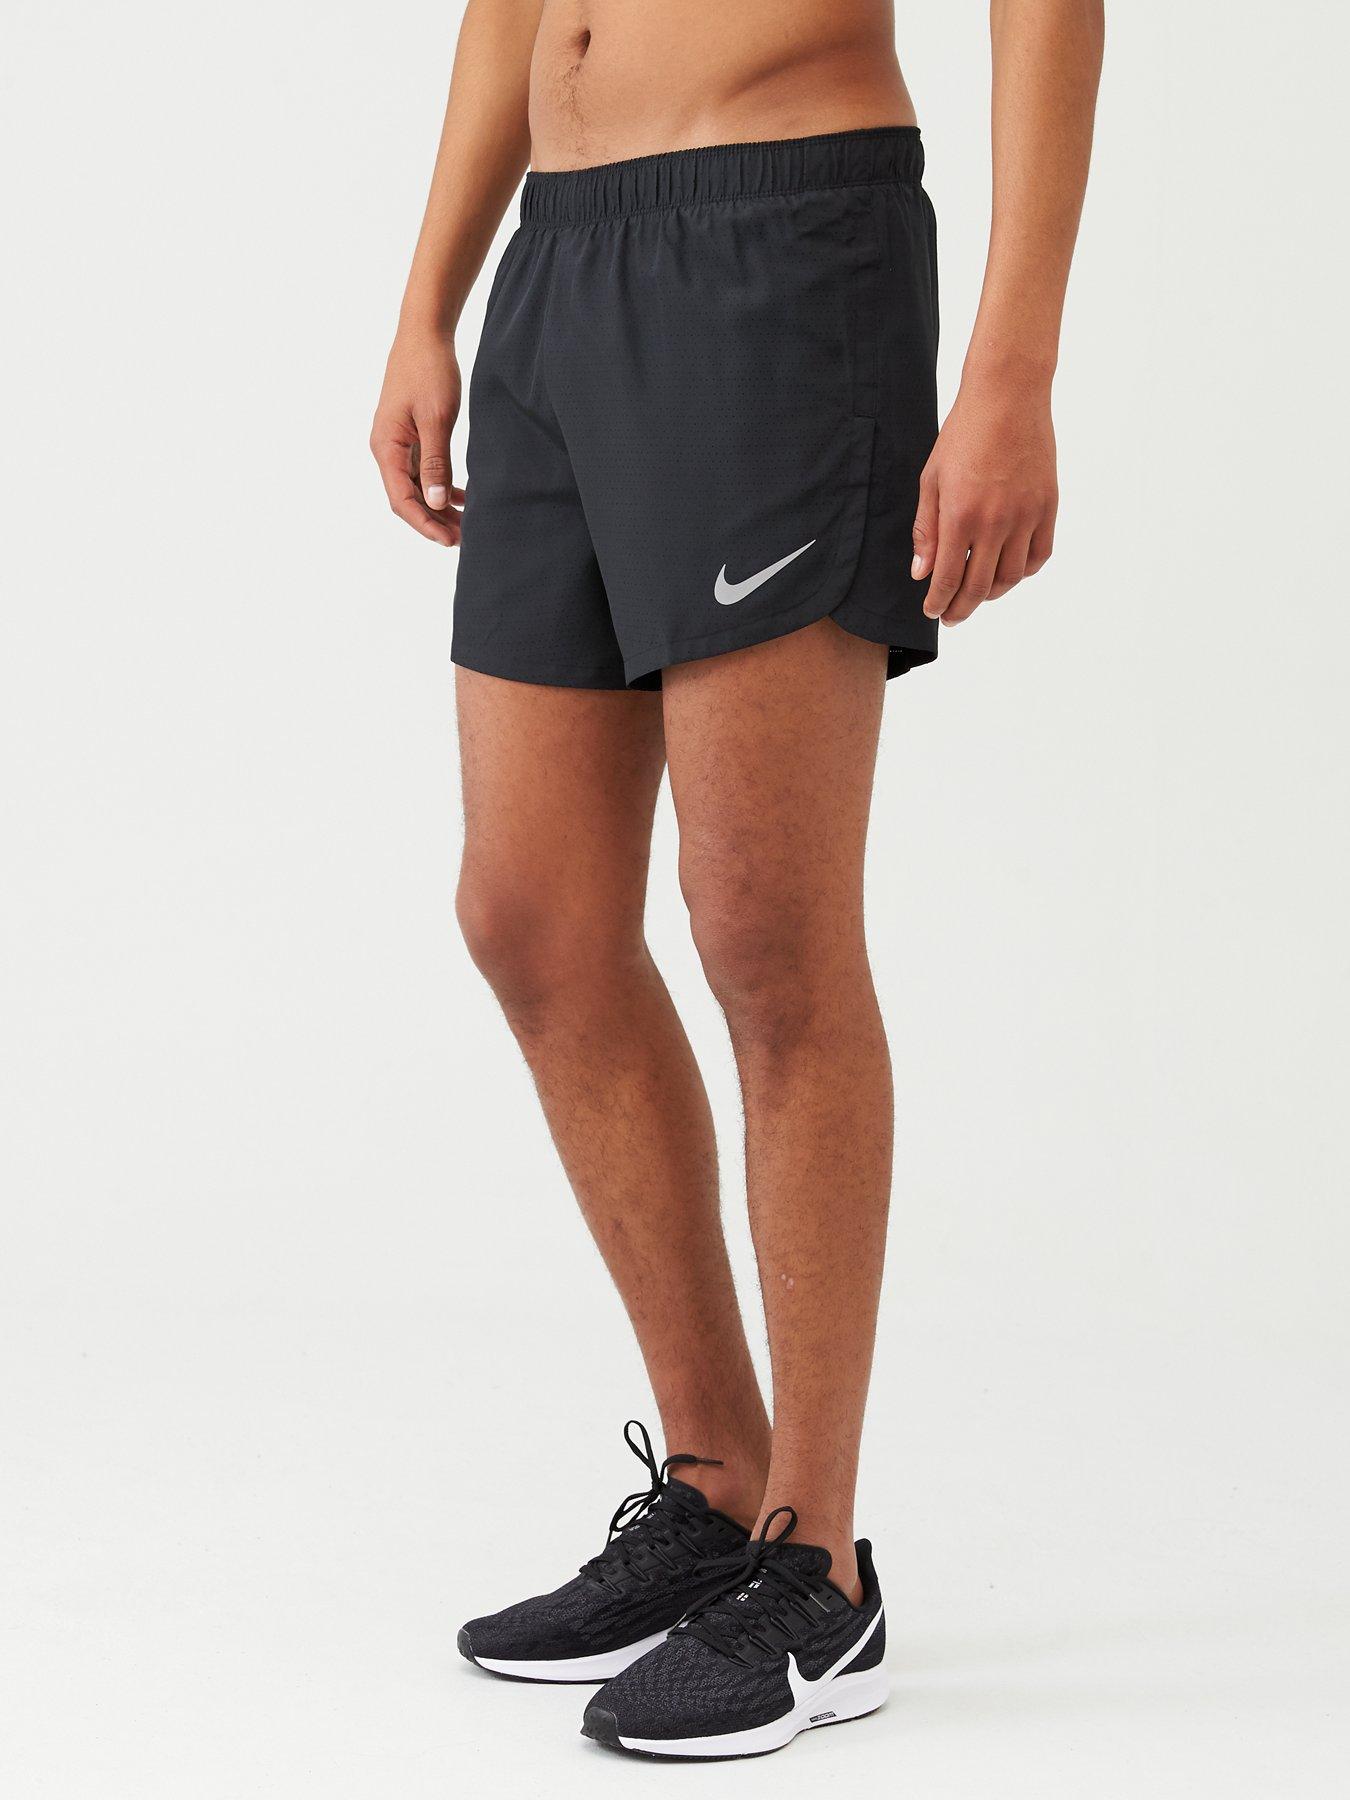 nike running shorts for sale